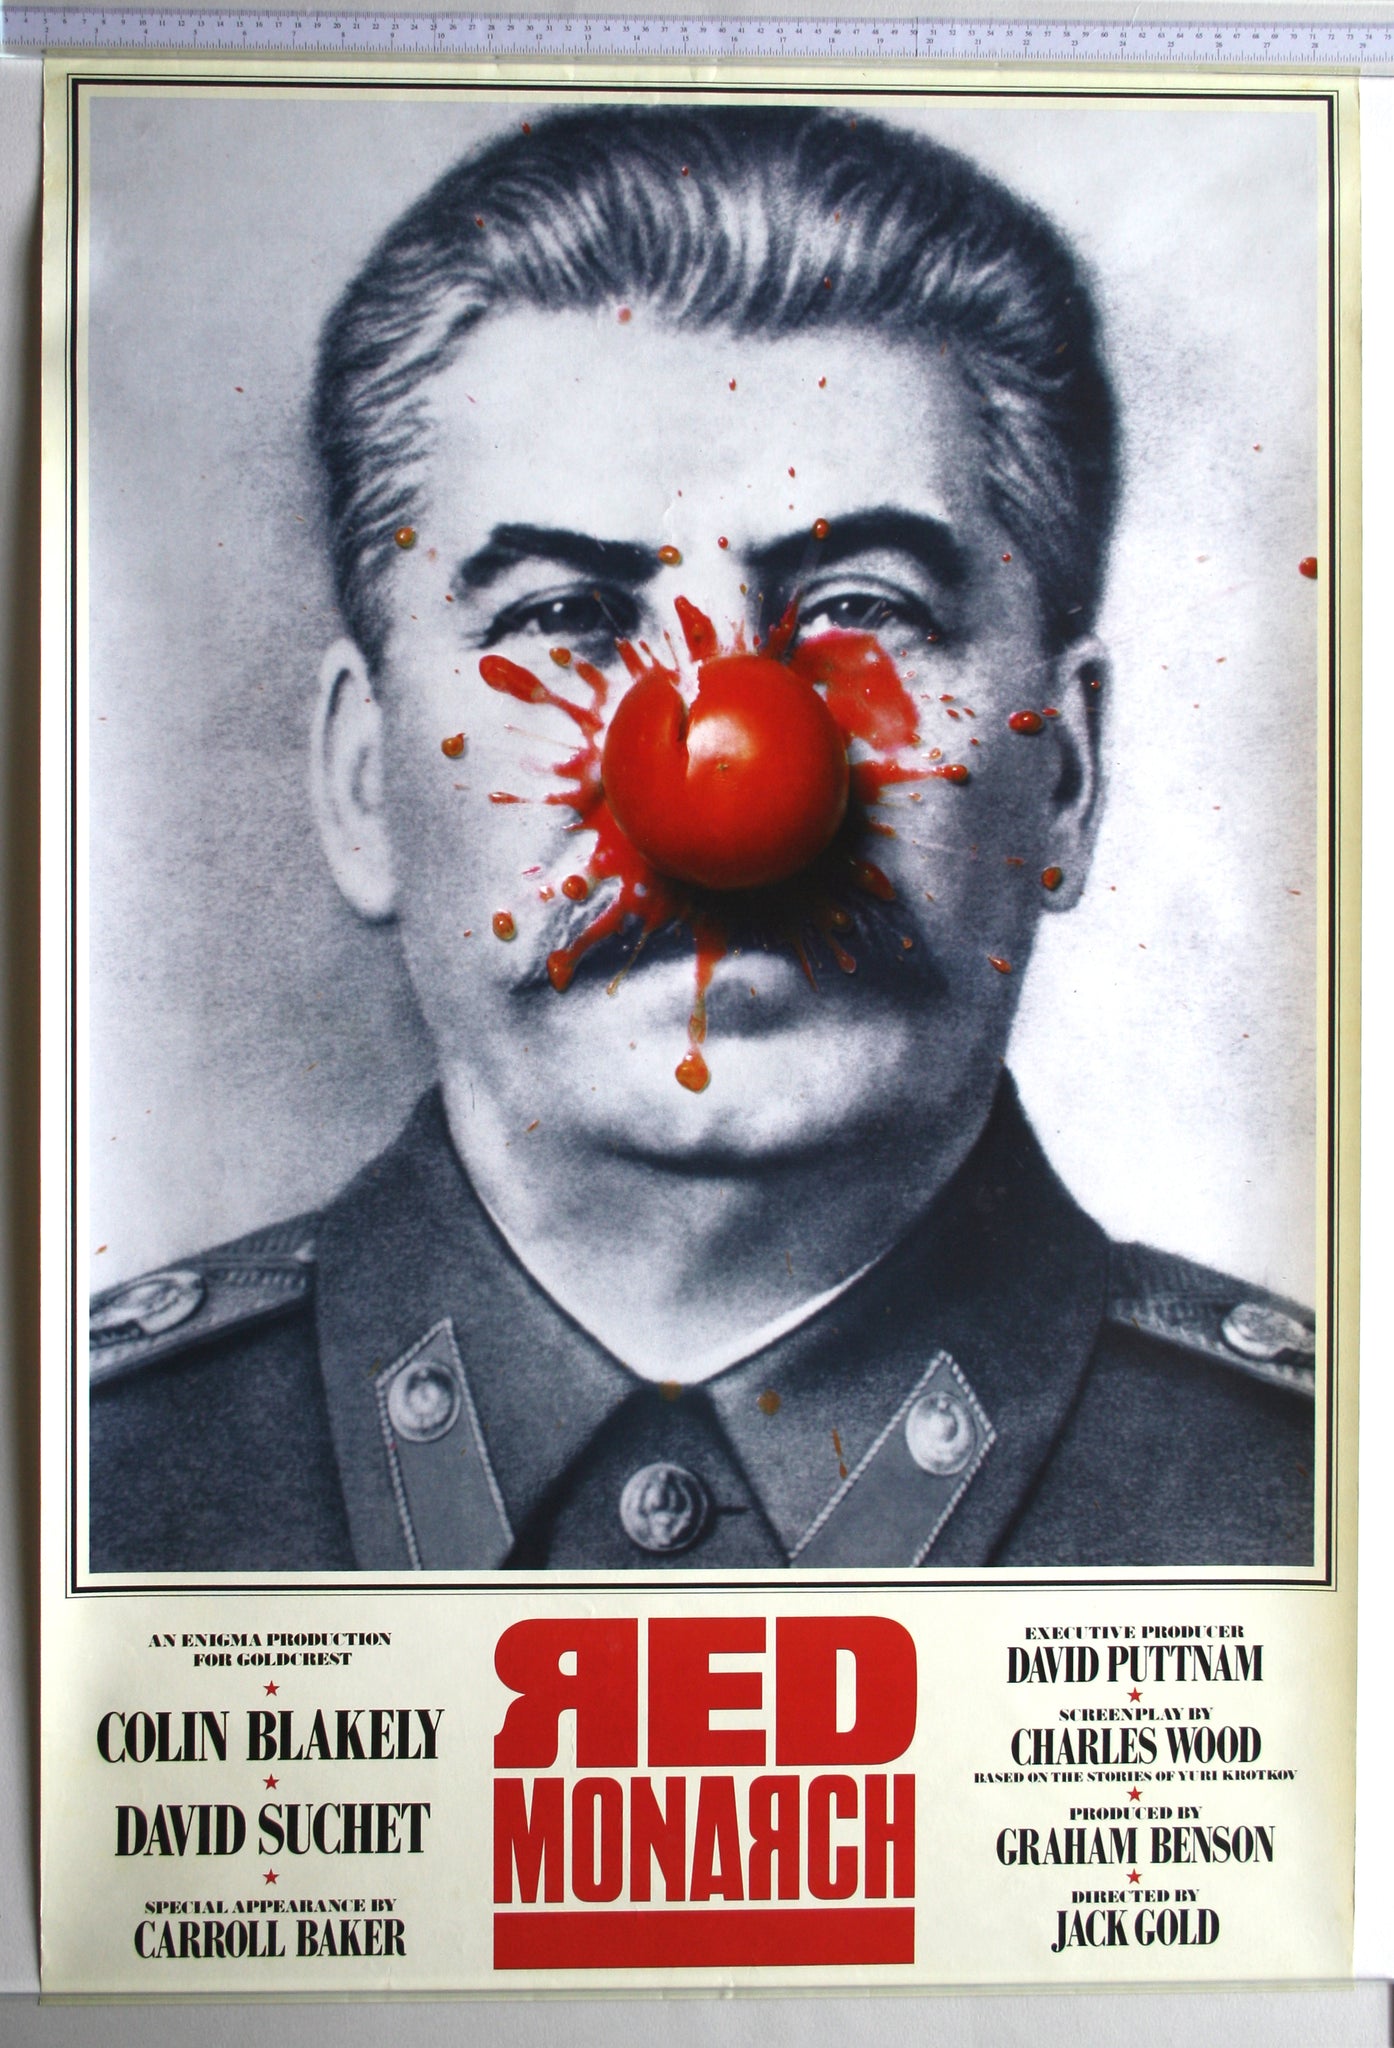 B+W photo of Stalin with thrown tomato landing in centre, giving him clown-like appearance. Mock-cyrillic text.